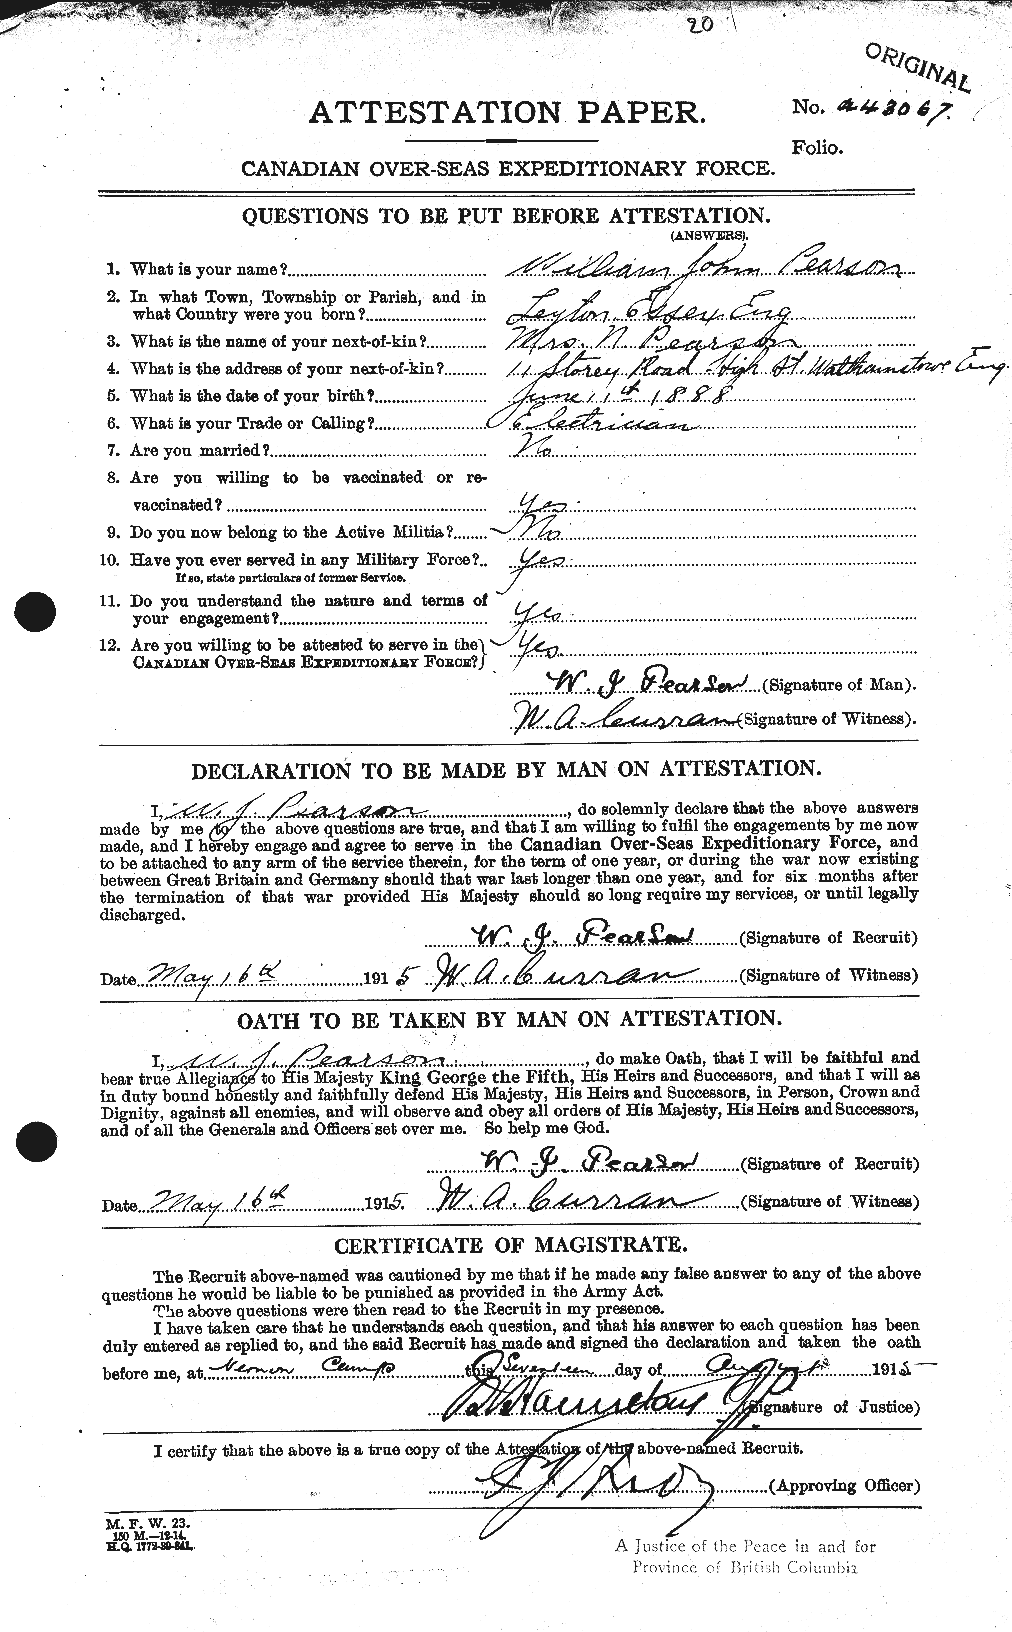 Personnel Records of the First World War - CEF 570775a